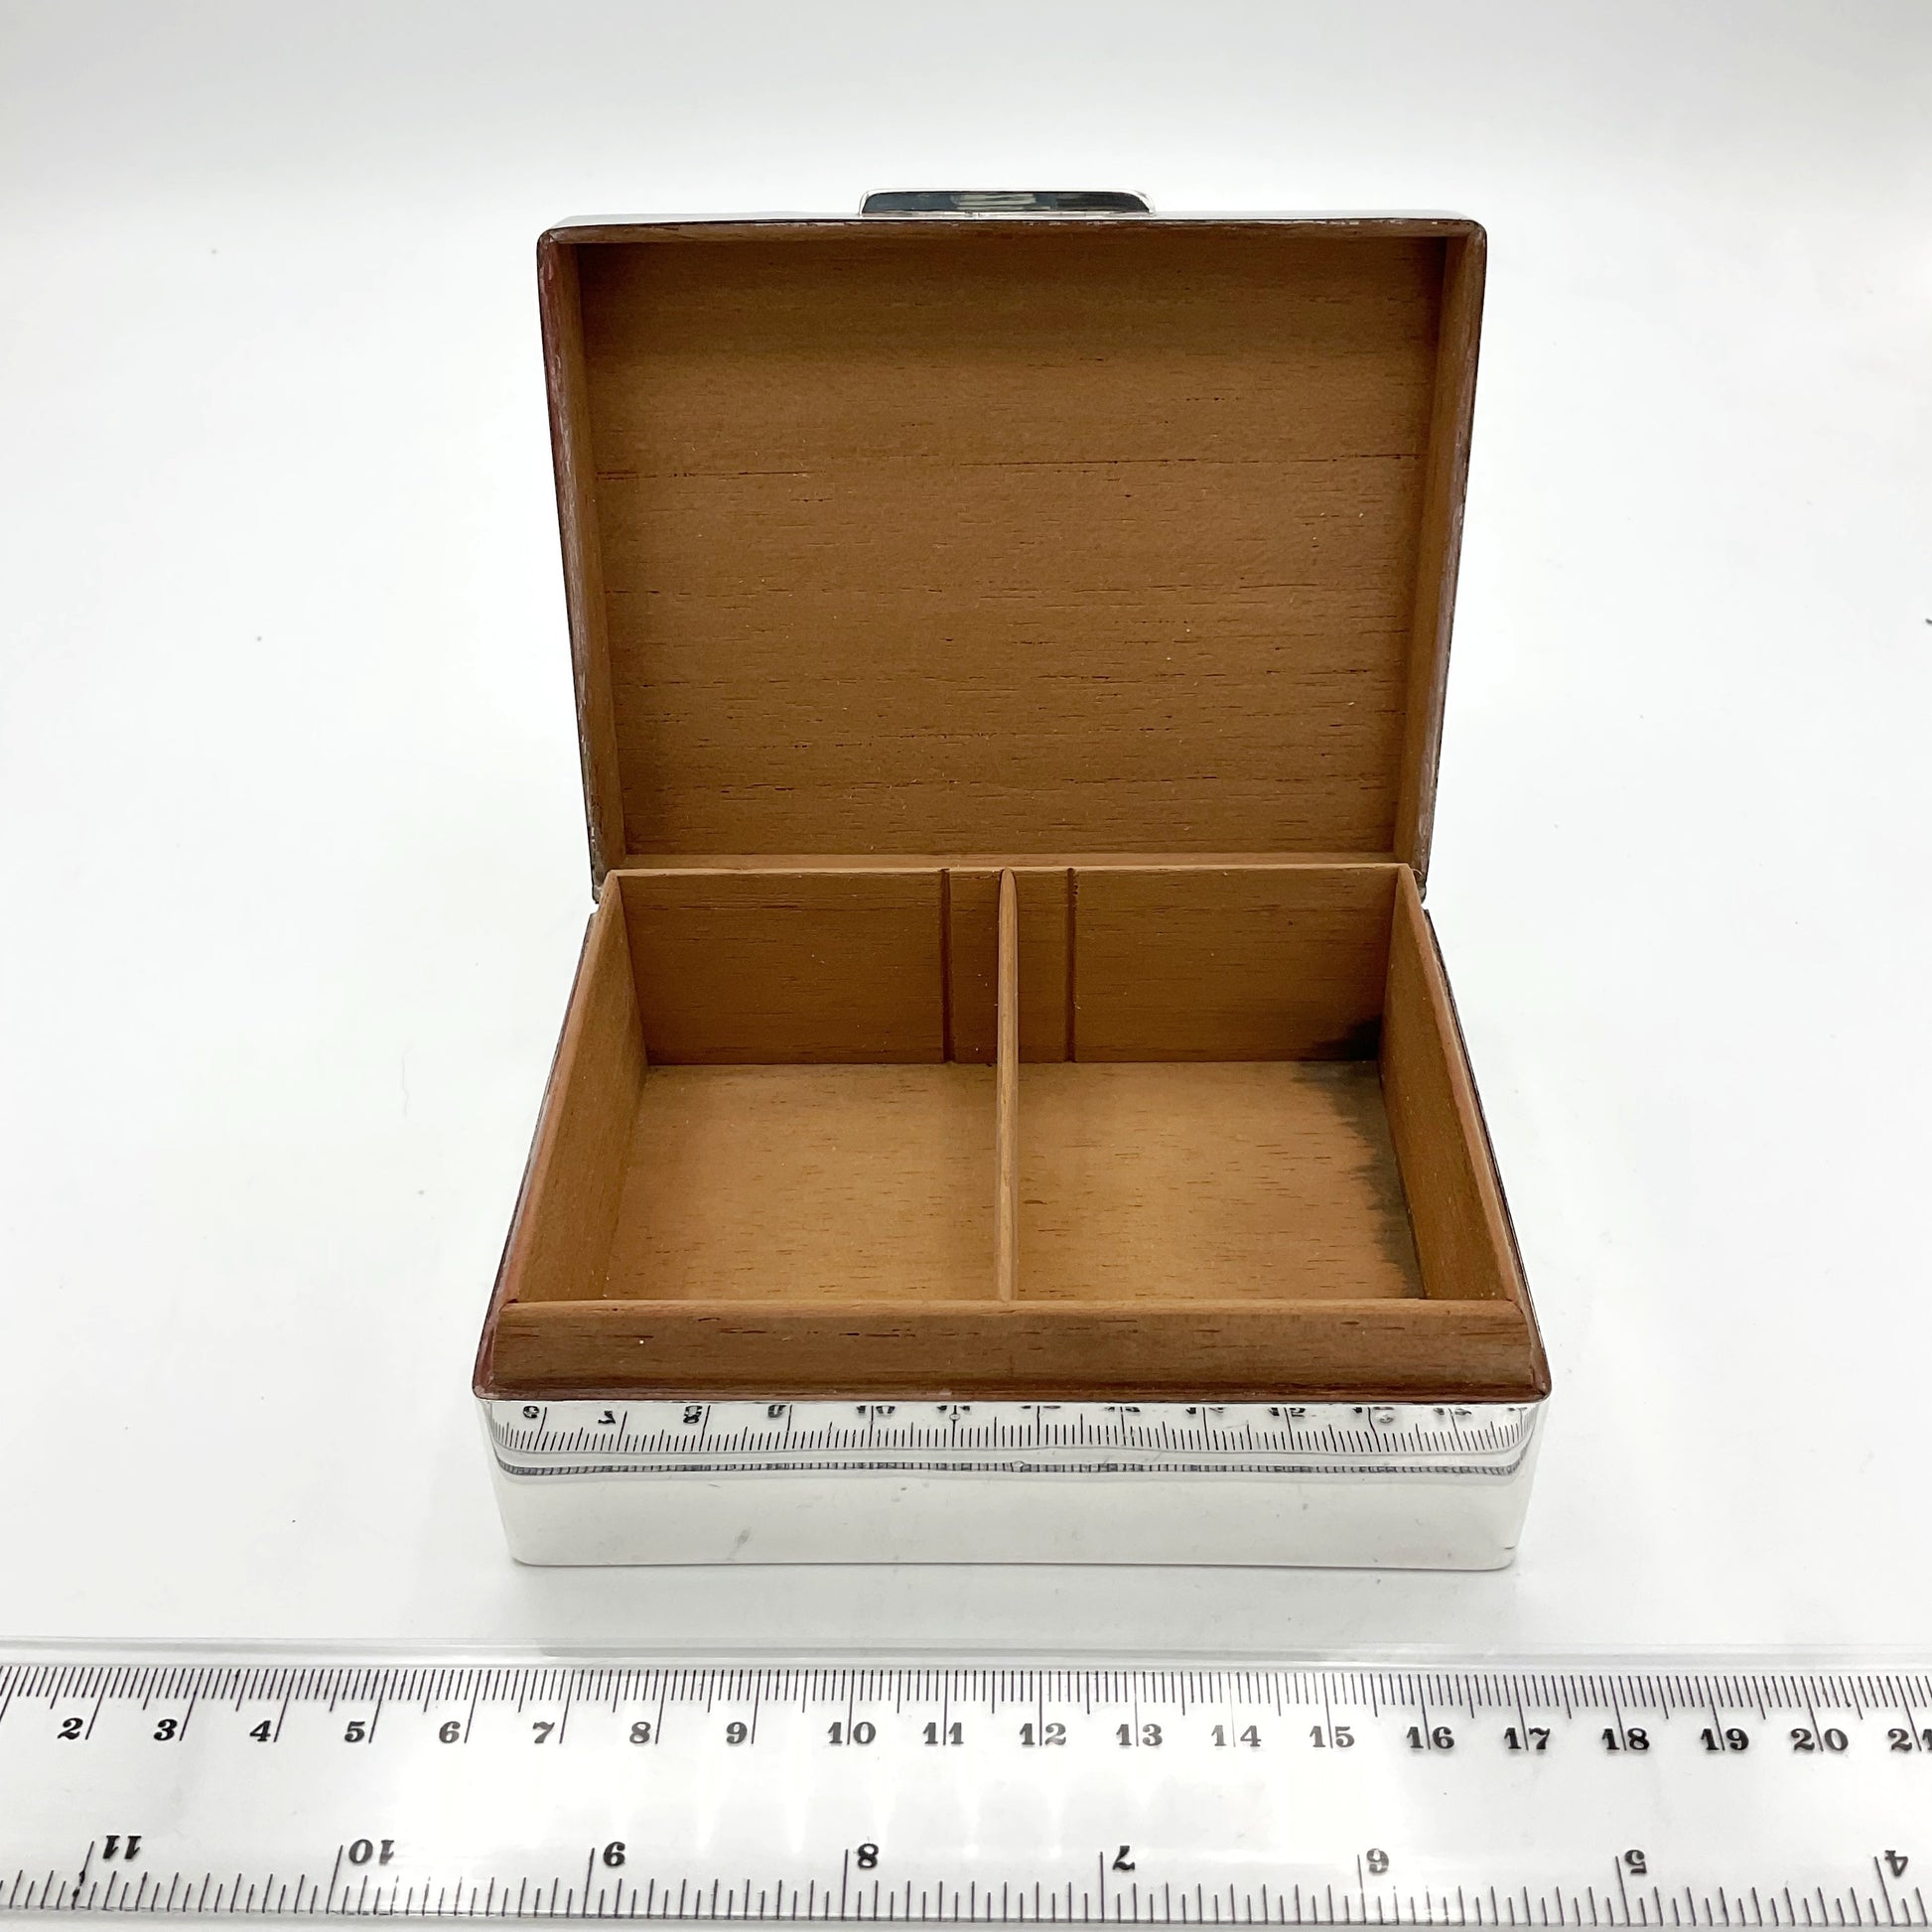 fully wood lined cigarette box with silver exterior next to ruler measuring approximately 10.5cm width